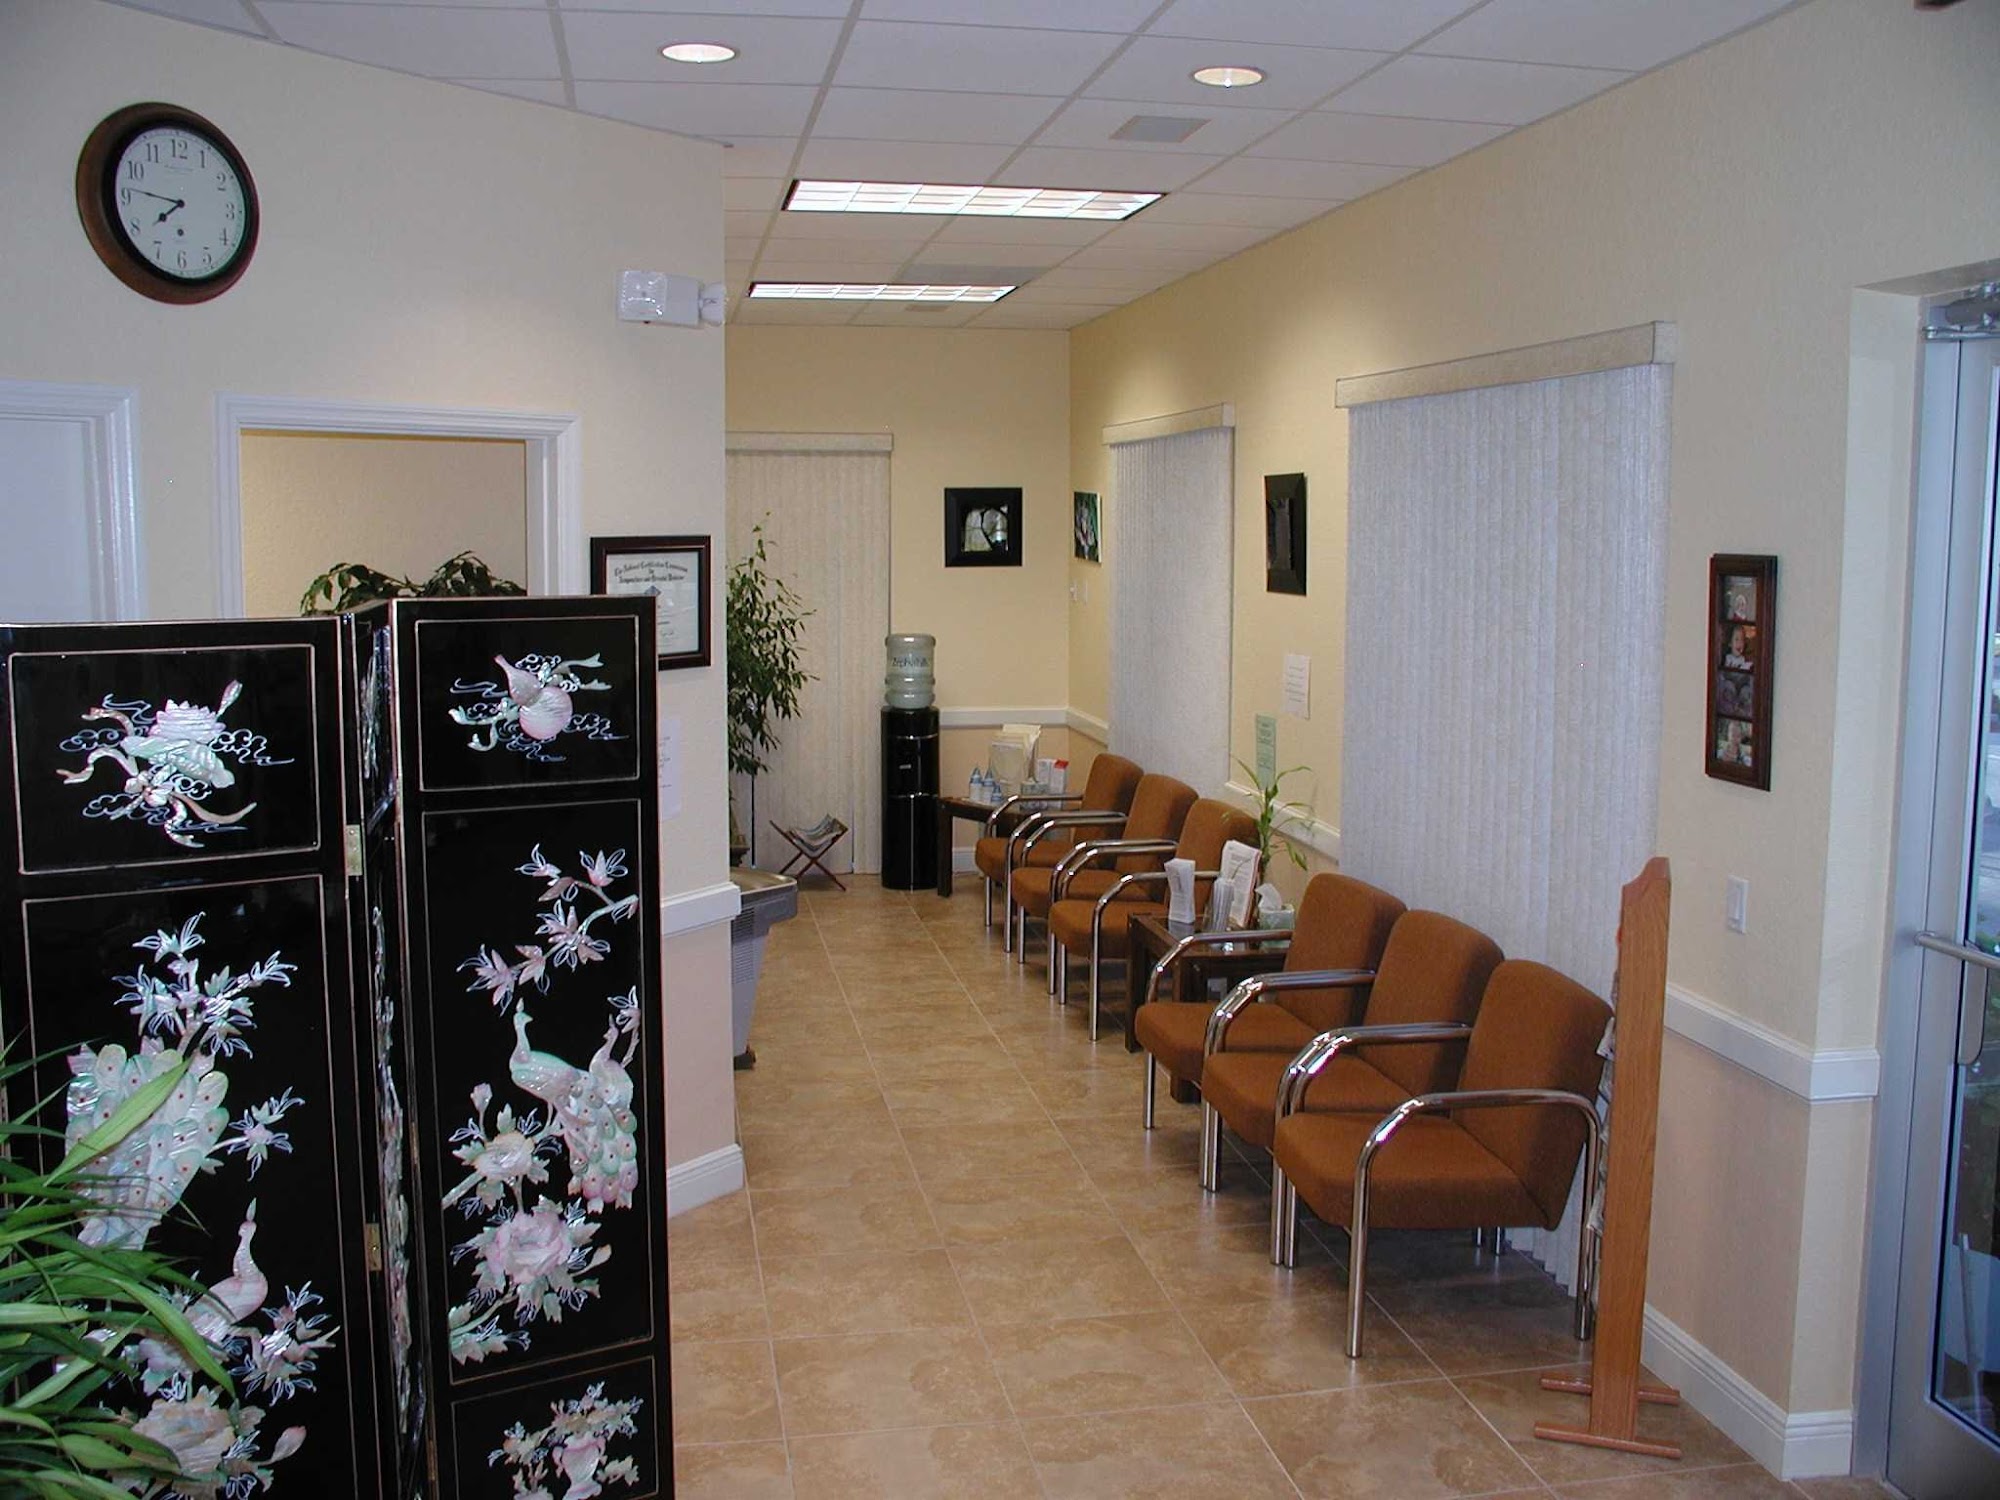 Chinese Acupuncture & Herbs Inc